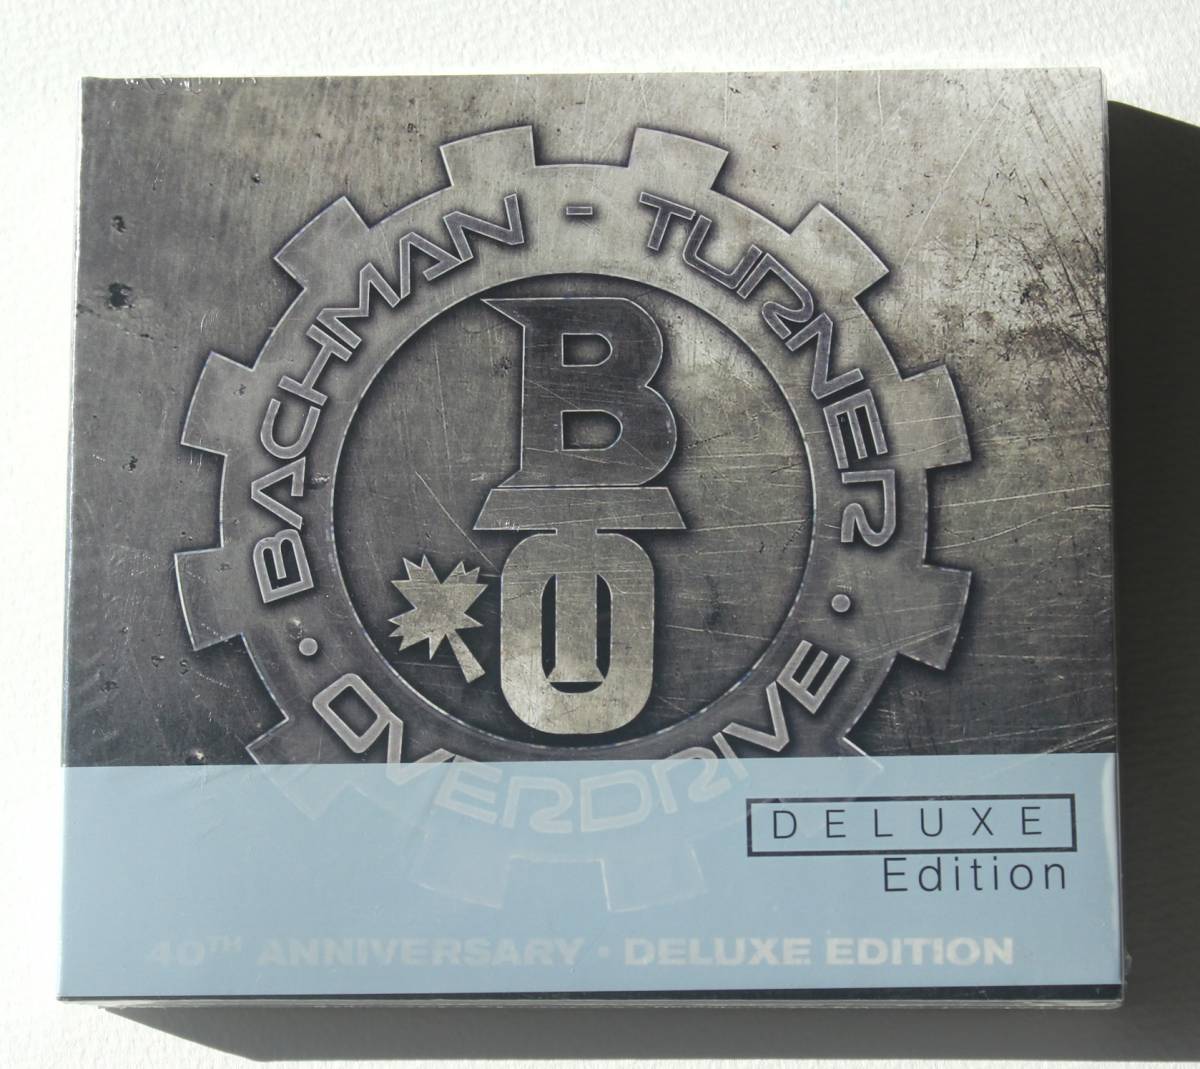 Bachman-Turner Overdrive : 40th Anniversary (Deluxe Edition) 2CD 76年の武道館ライヴを追加収録_画像1